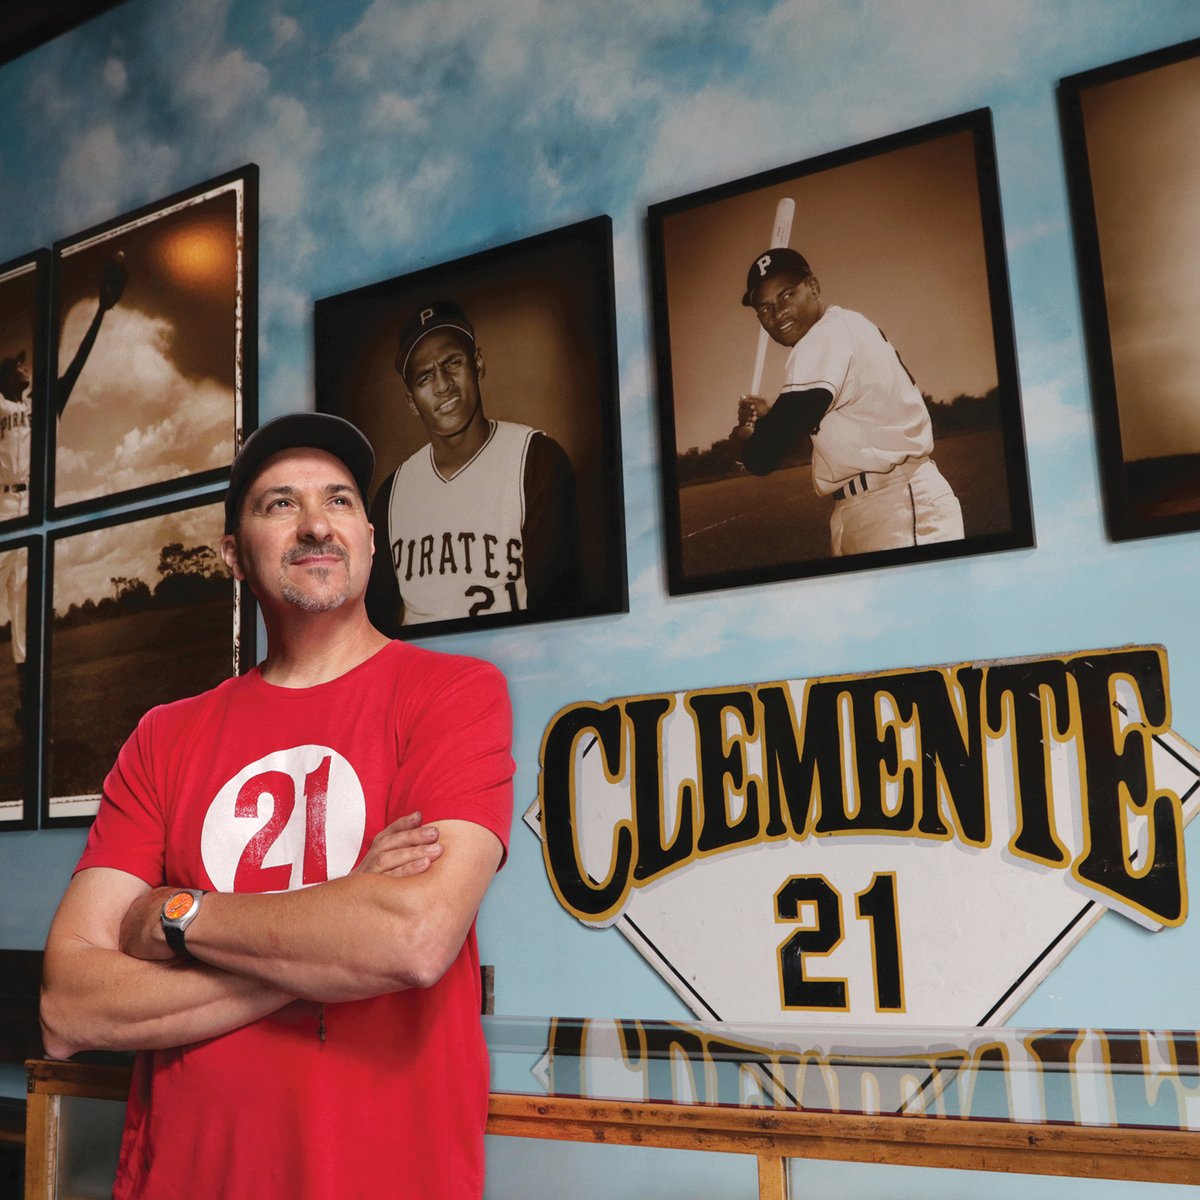 Roberto Clemente Projects  Photos, videos, logos, illustrations